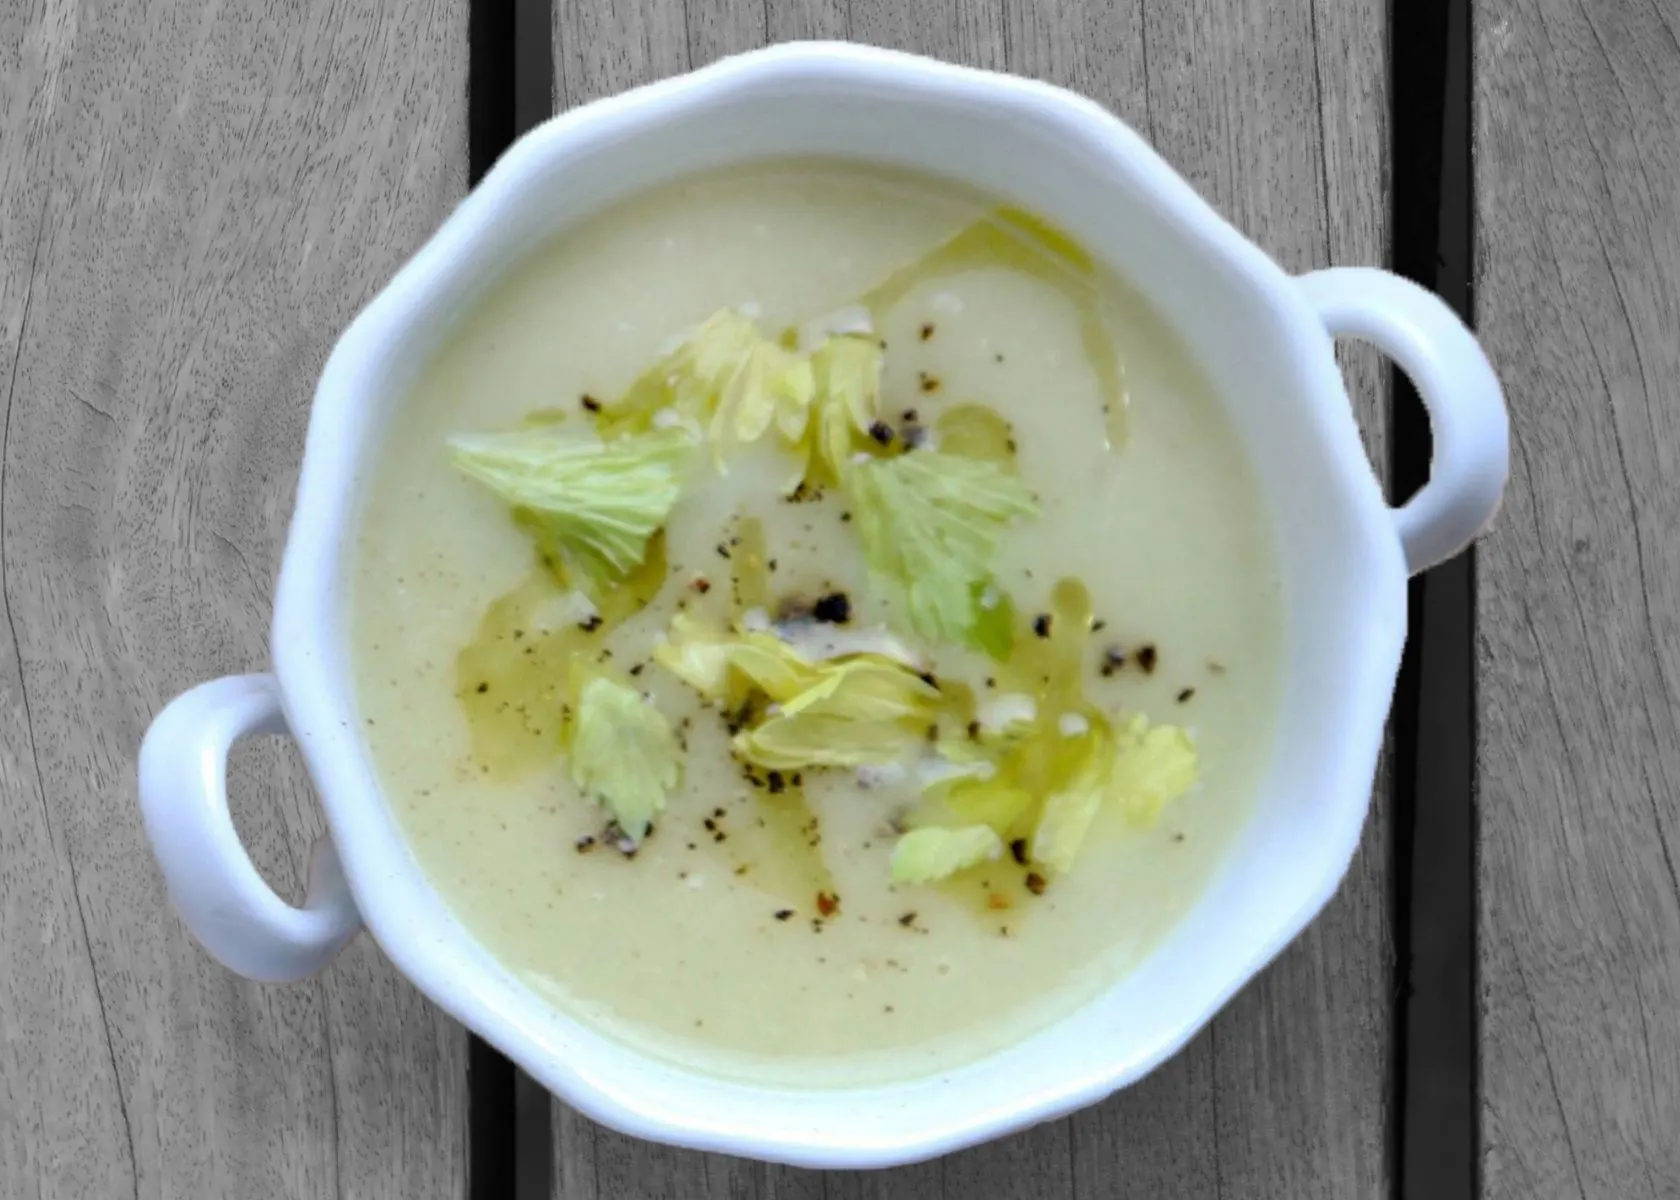 Cream of celery soup in white bowl with celery leaves for garnish.